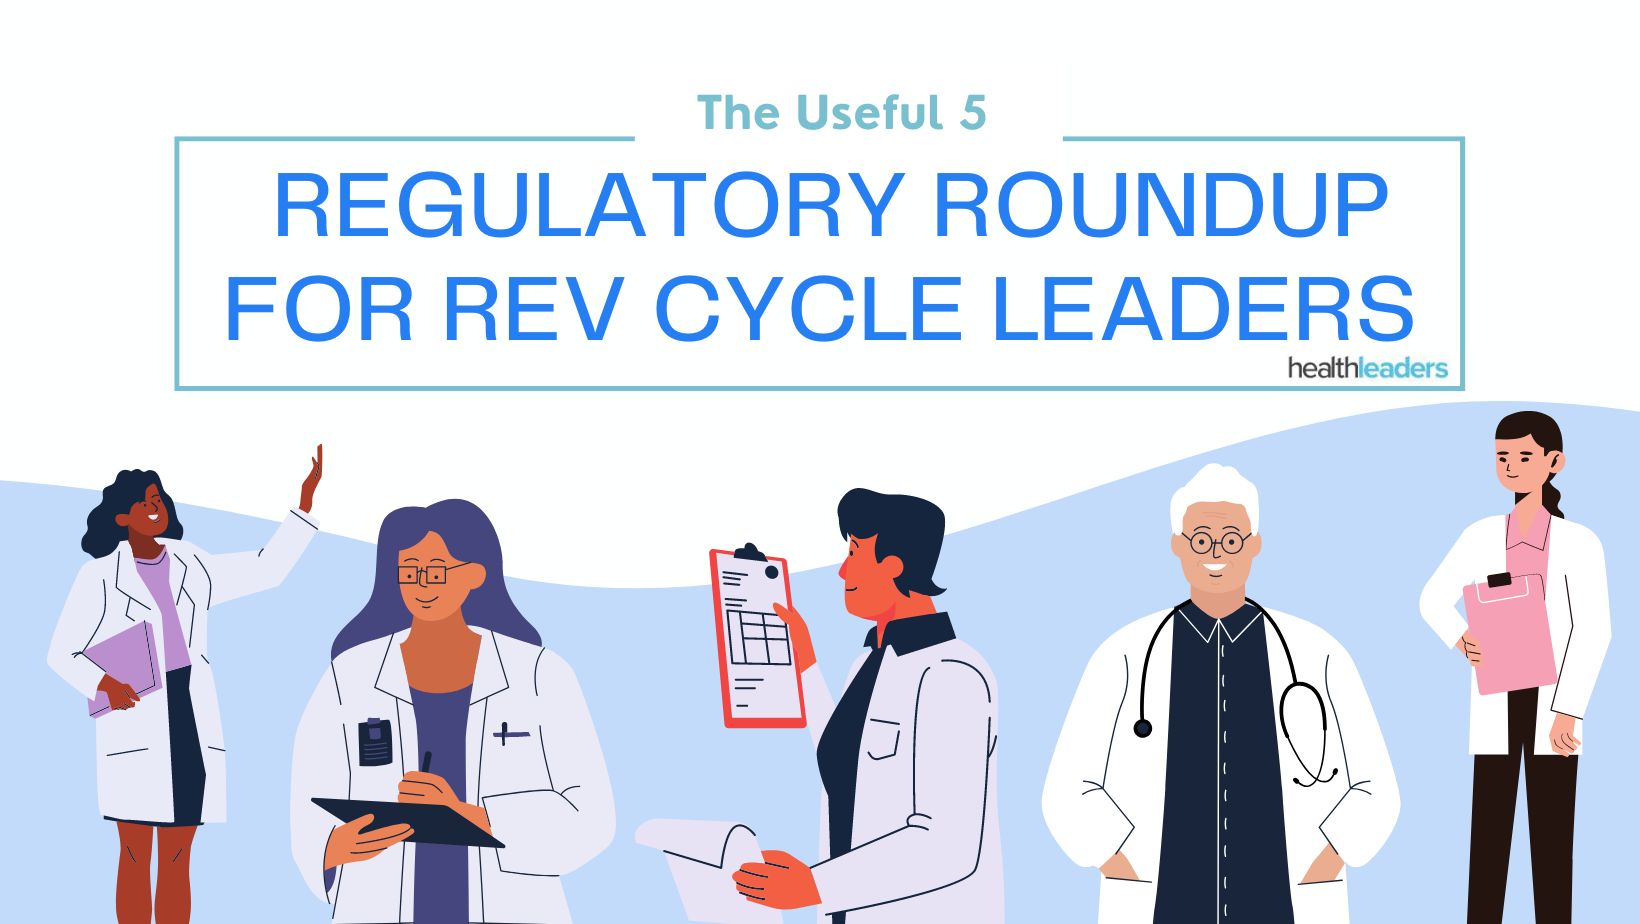 The Useful 5: Regulatory Roundup for Rev Cycle Leaders